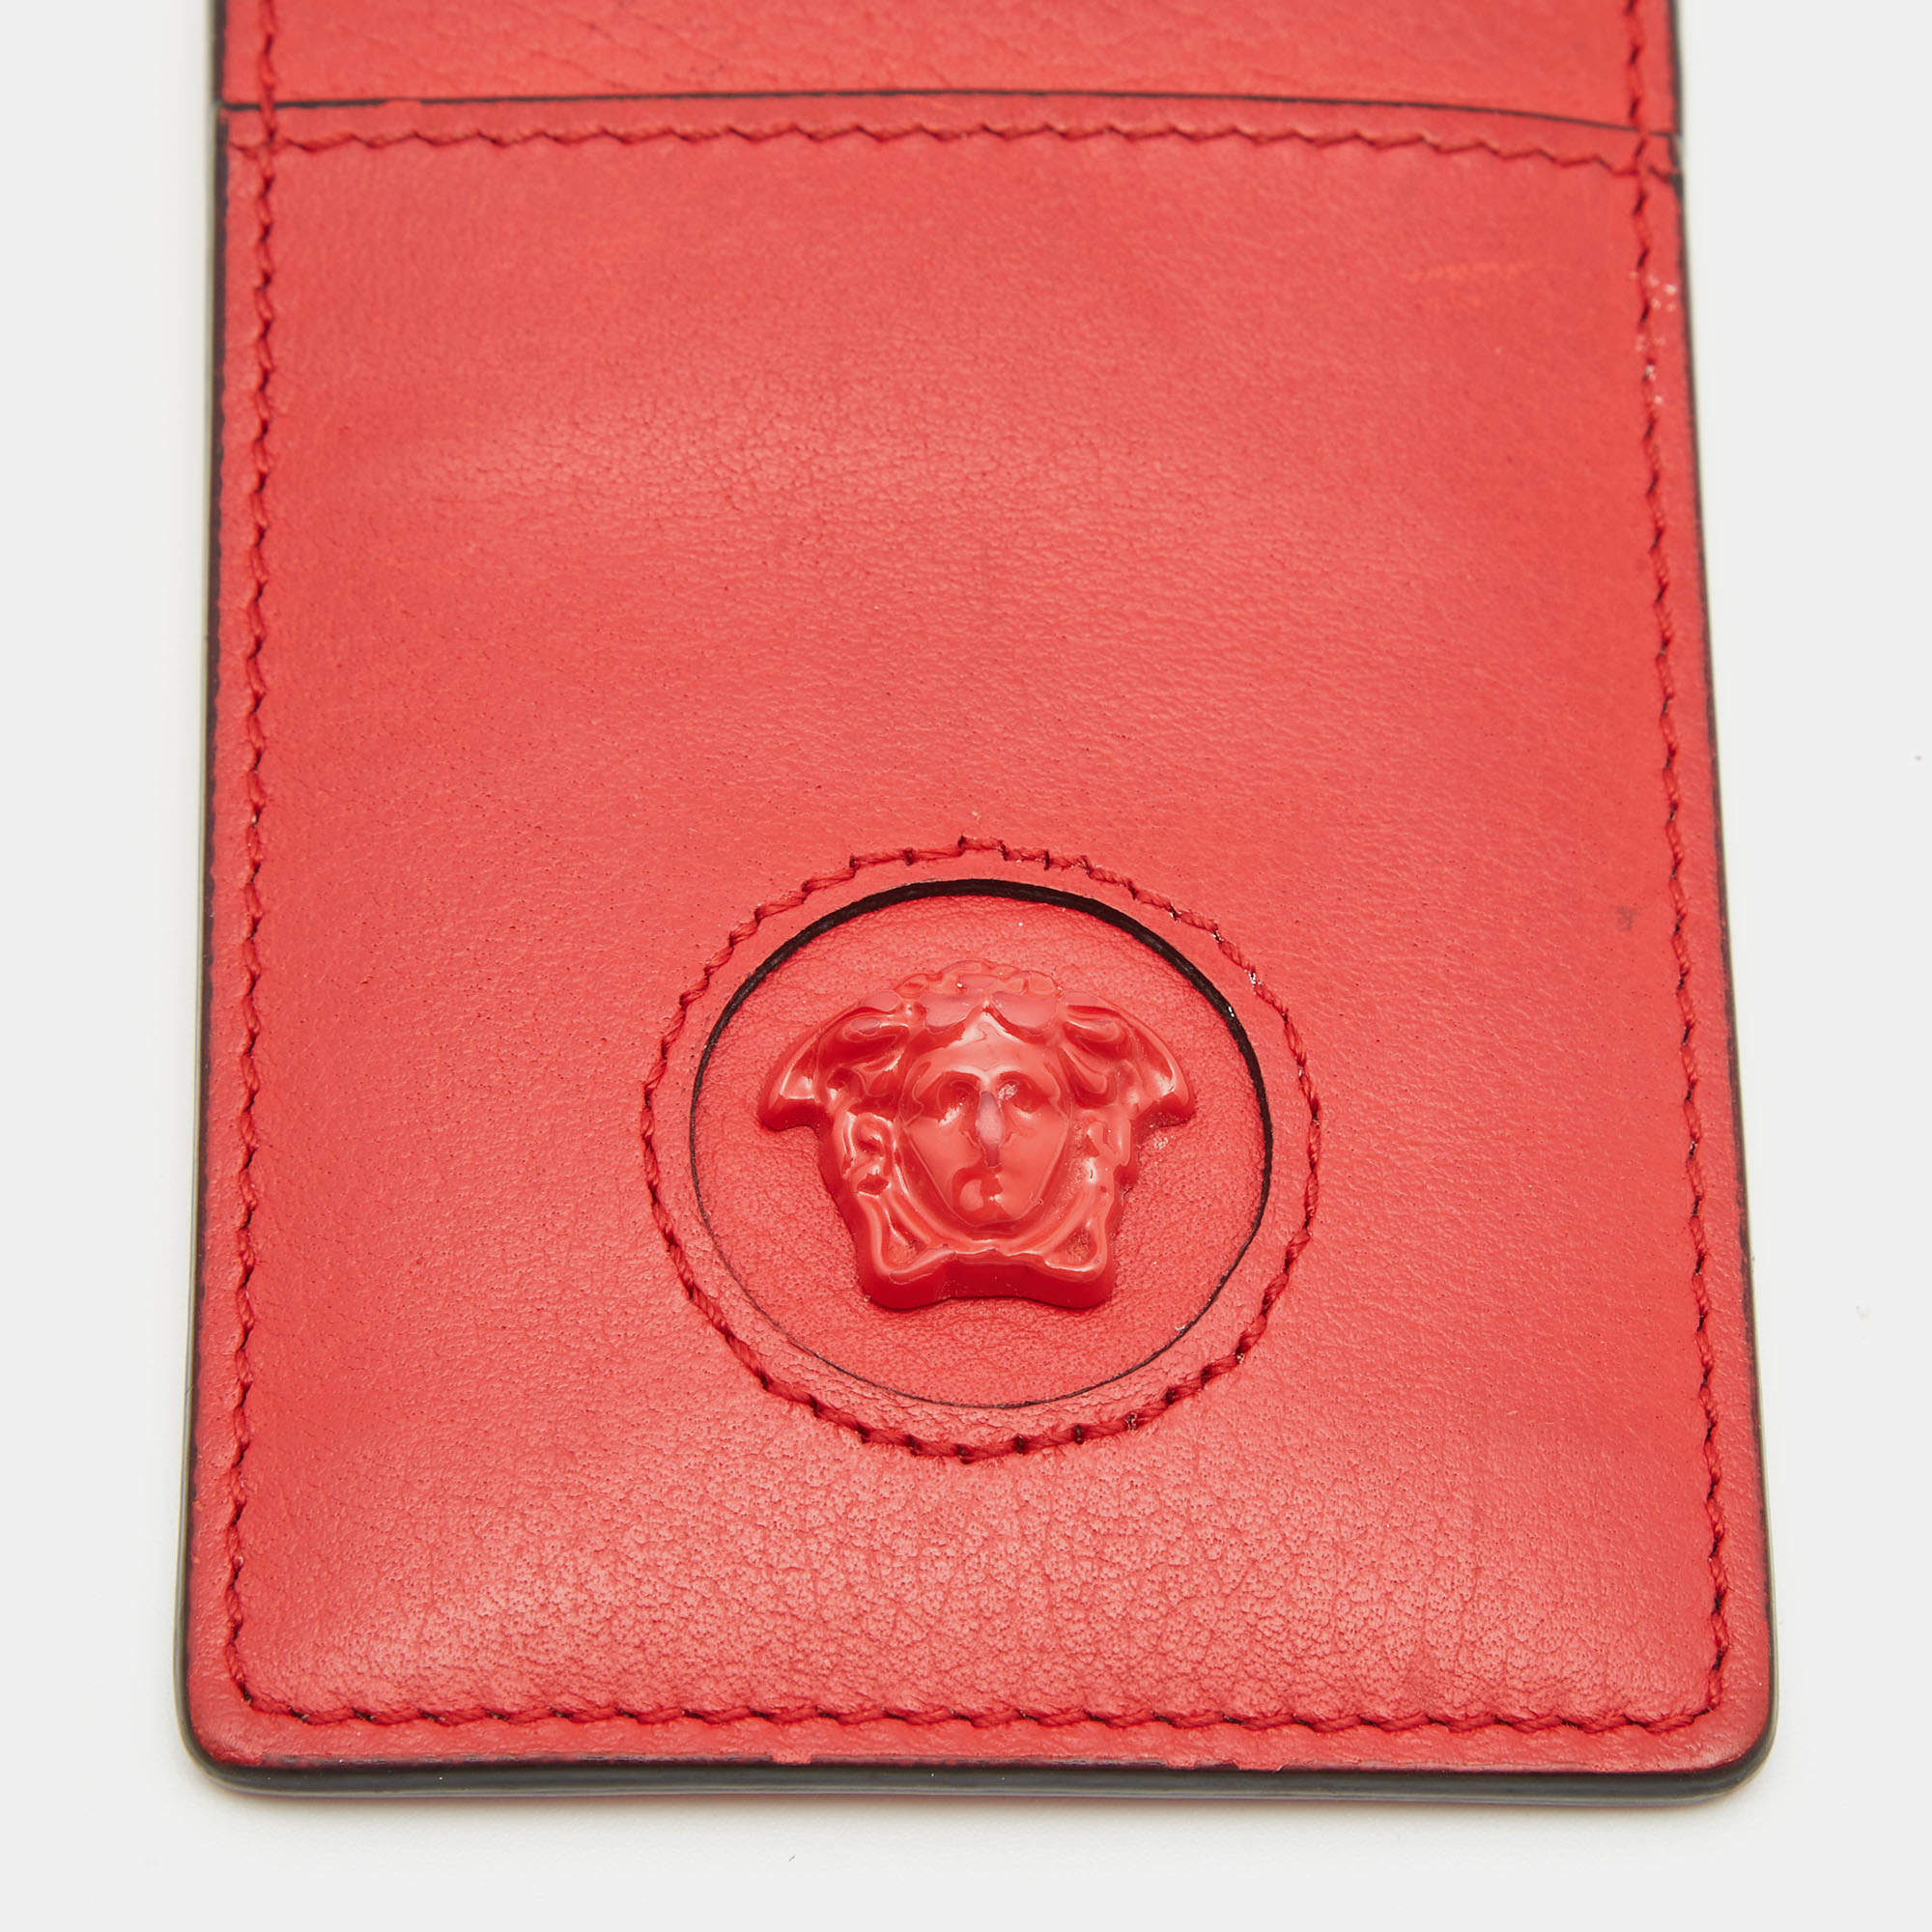 Versace Red Leather Lanyard Card Holder Versace